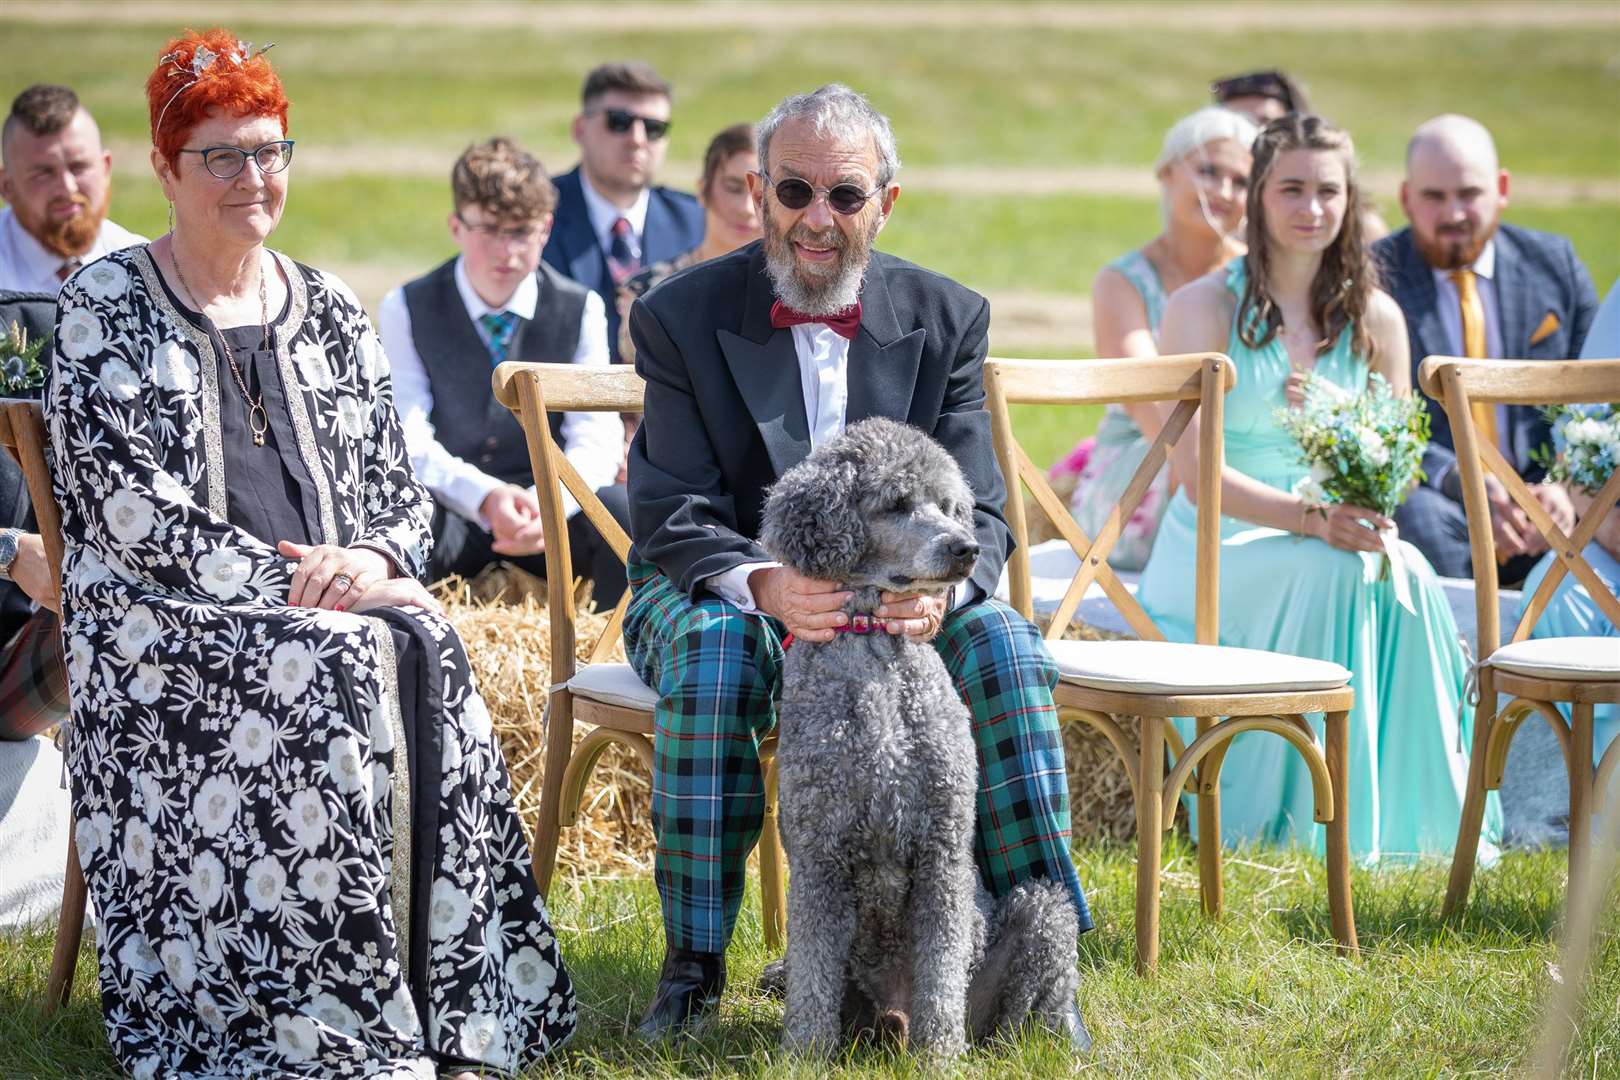 Paddy the horse was not the only four-legged guest at the wedding.